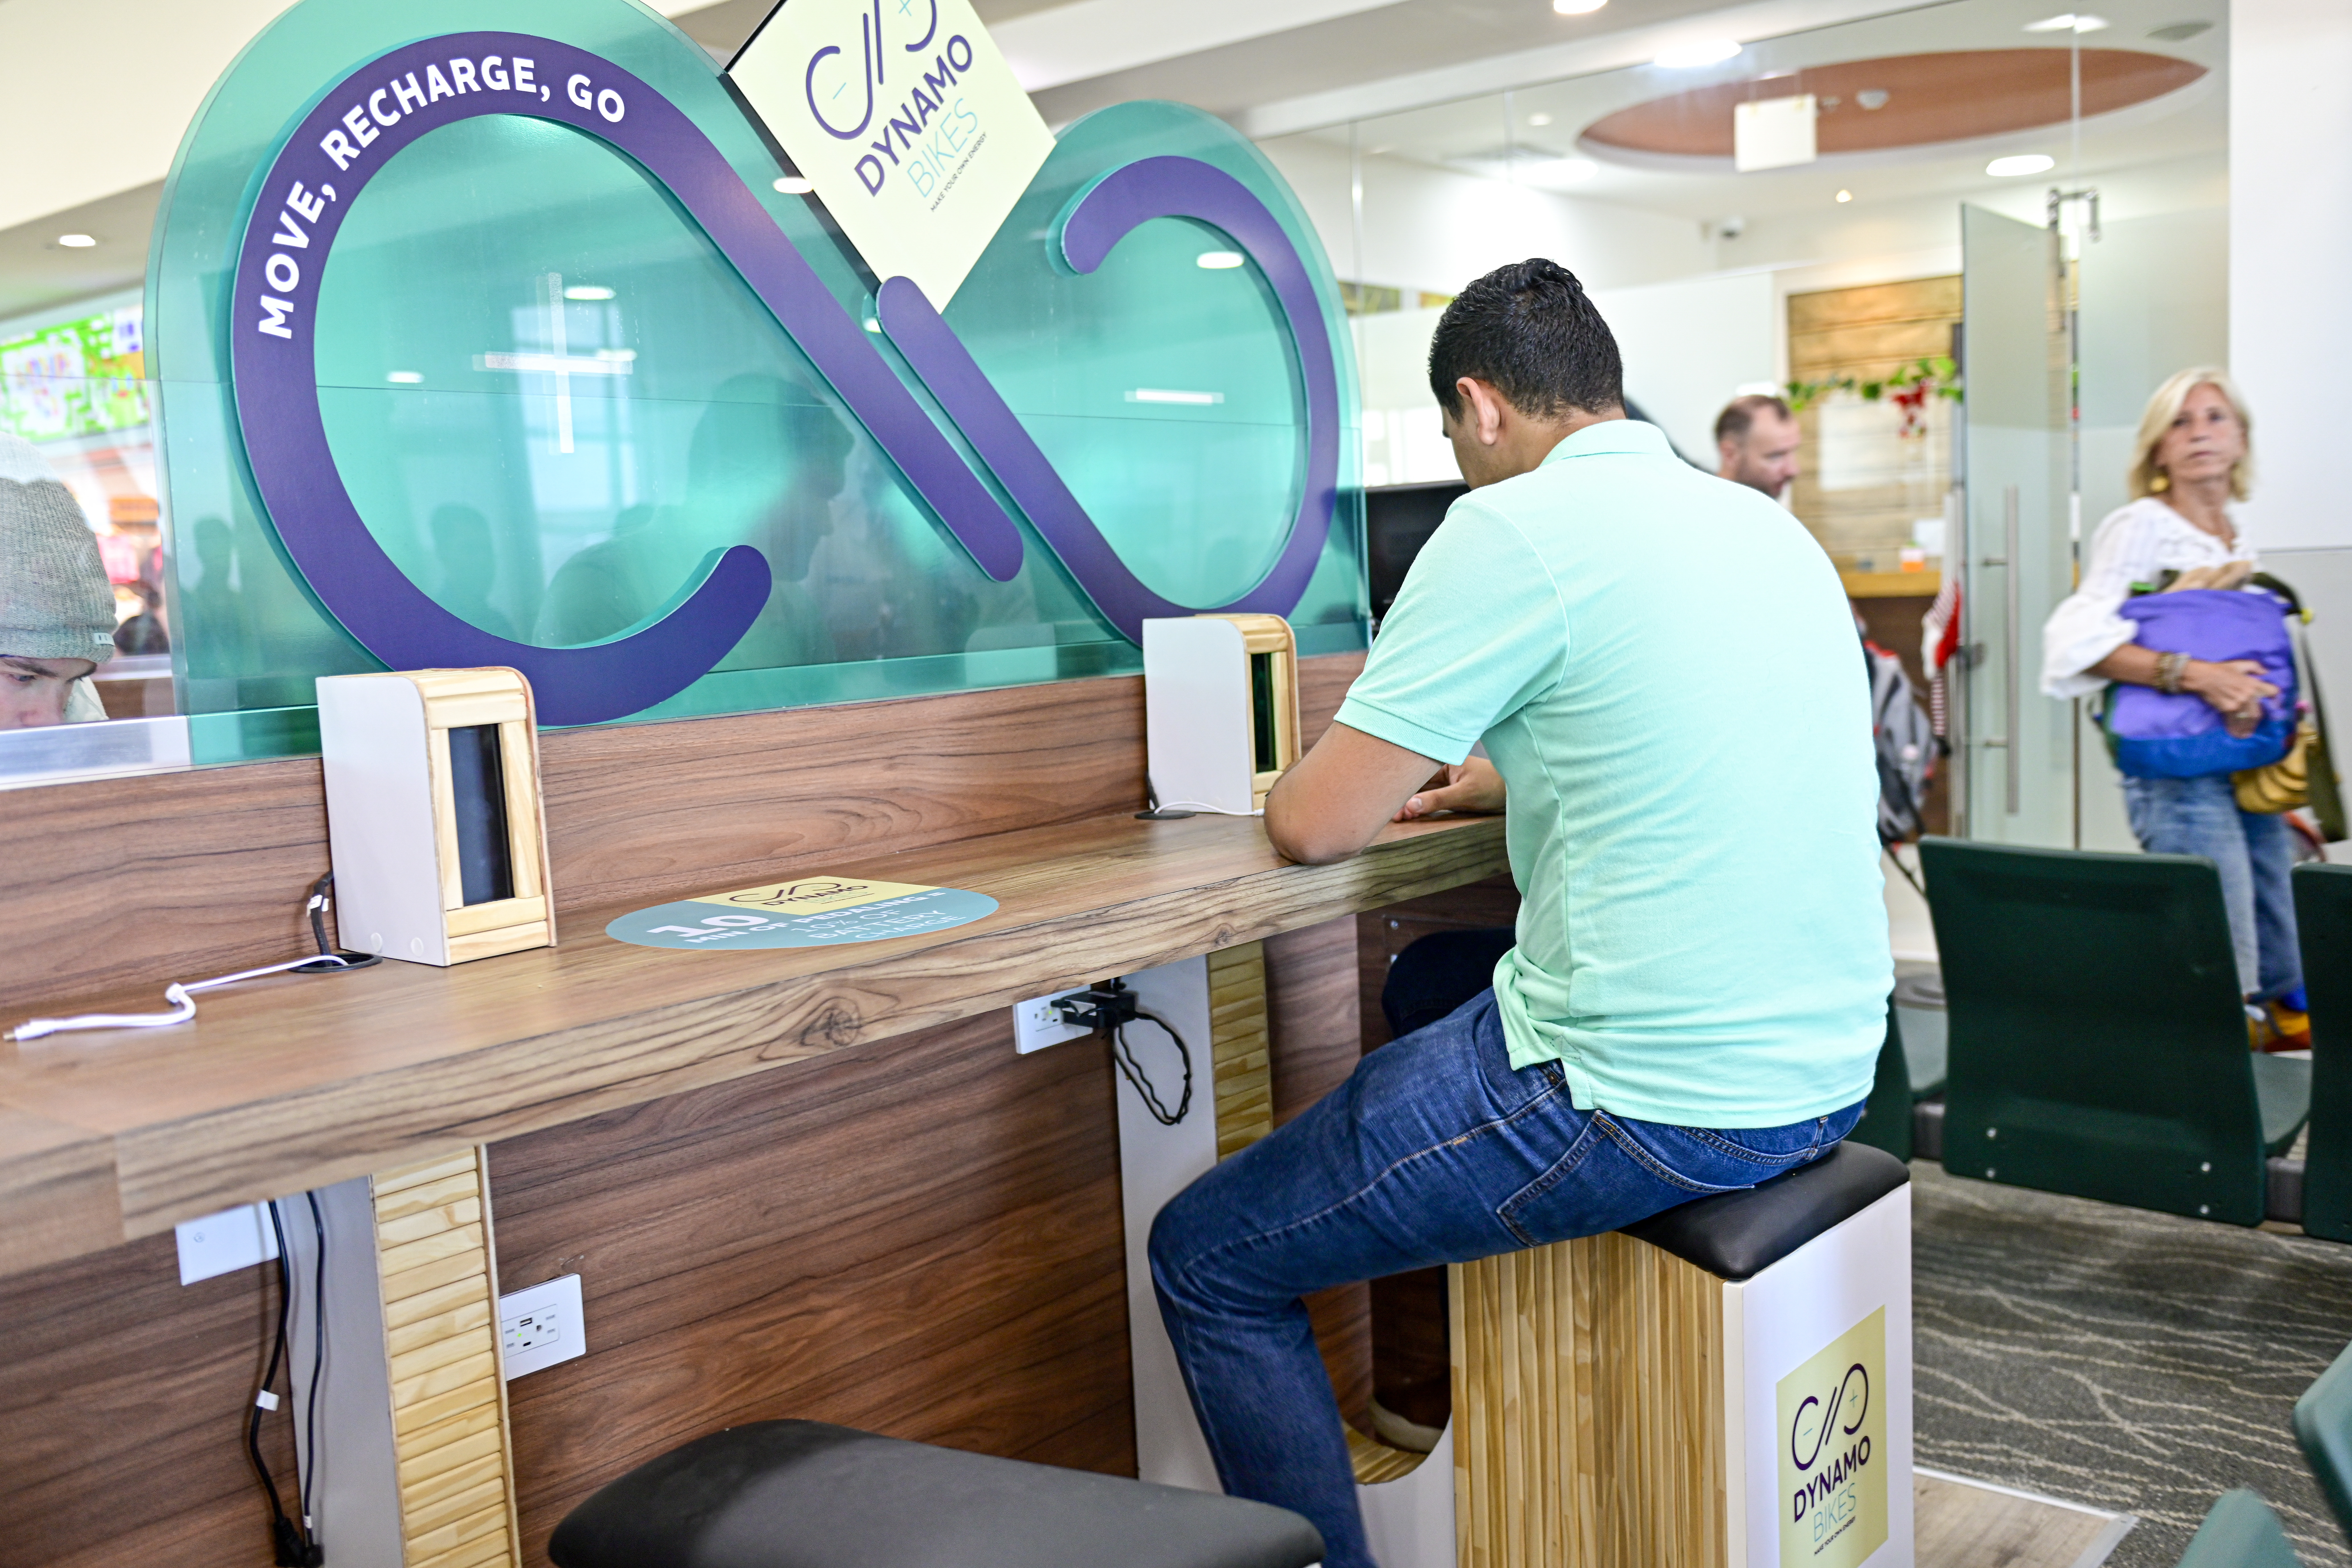 Passengers get pedaling to charge their mobile phones at Guanacaste Airport